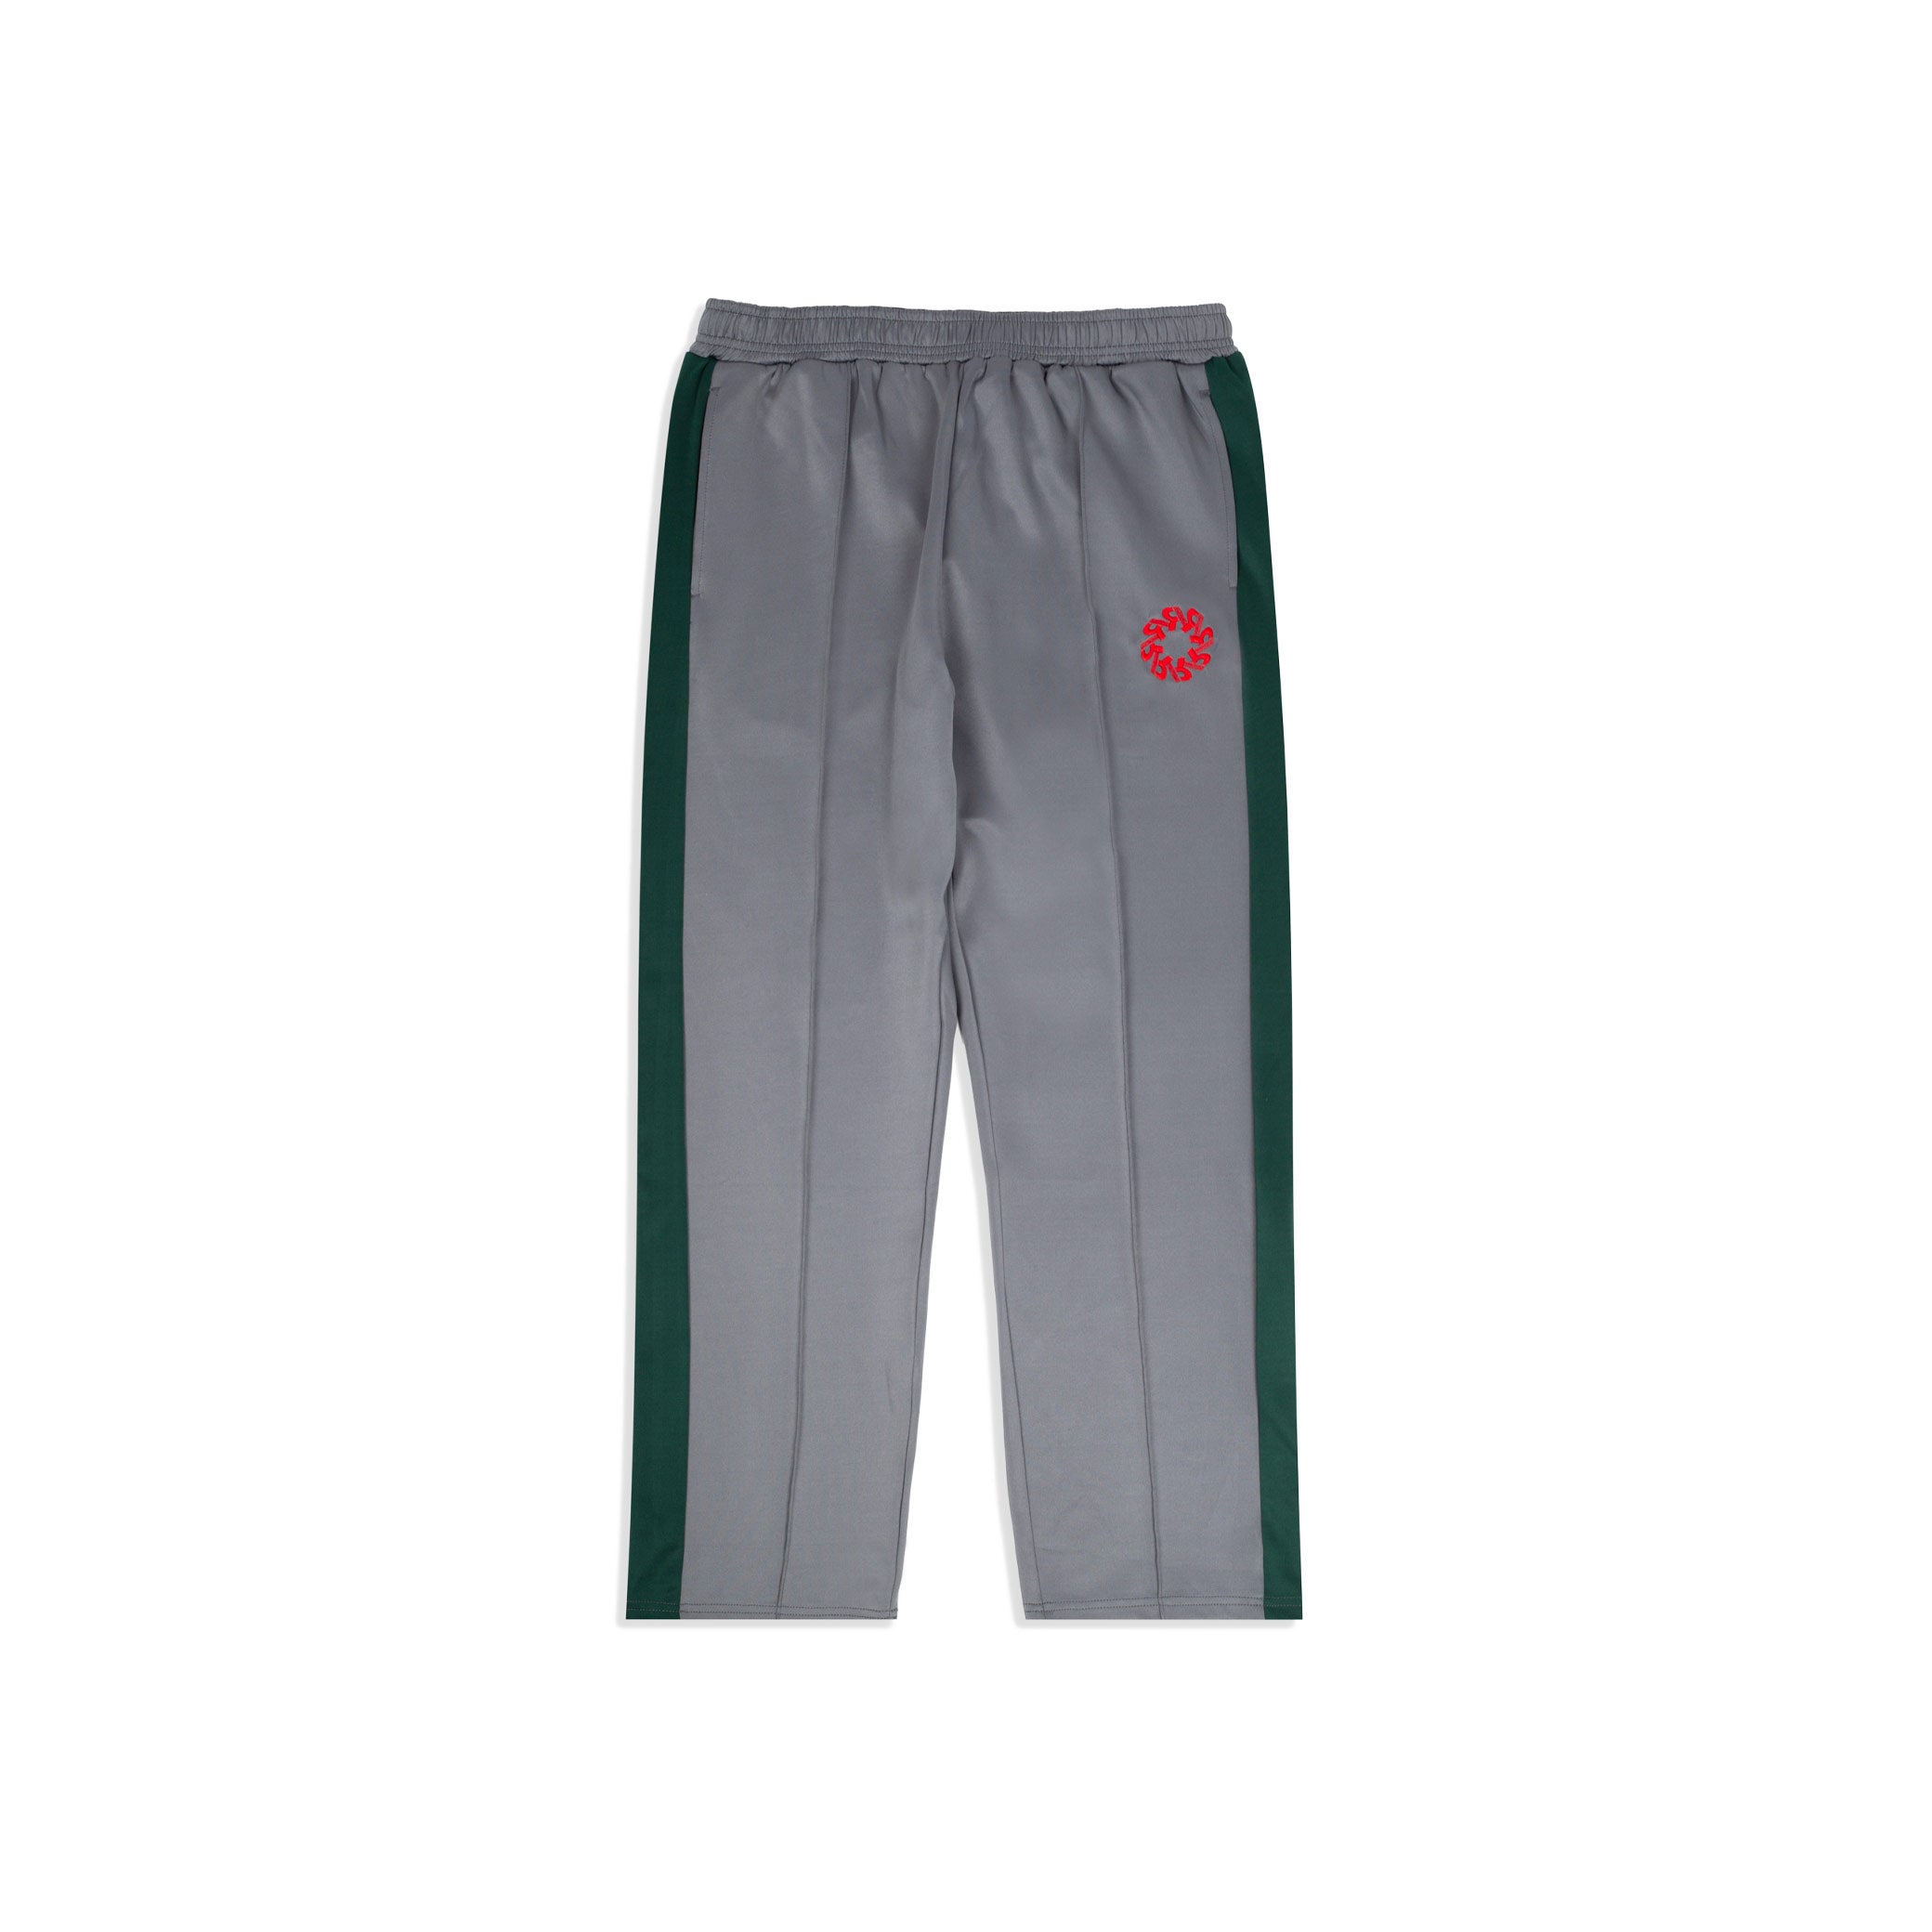 'Warm Down' Track Pant - Gray/Green/Red